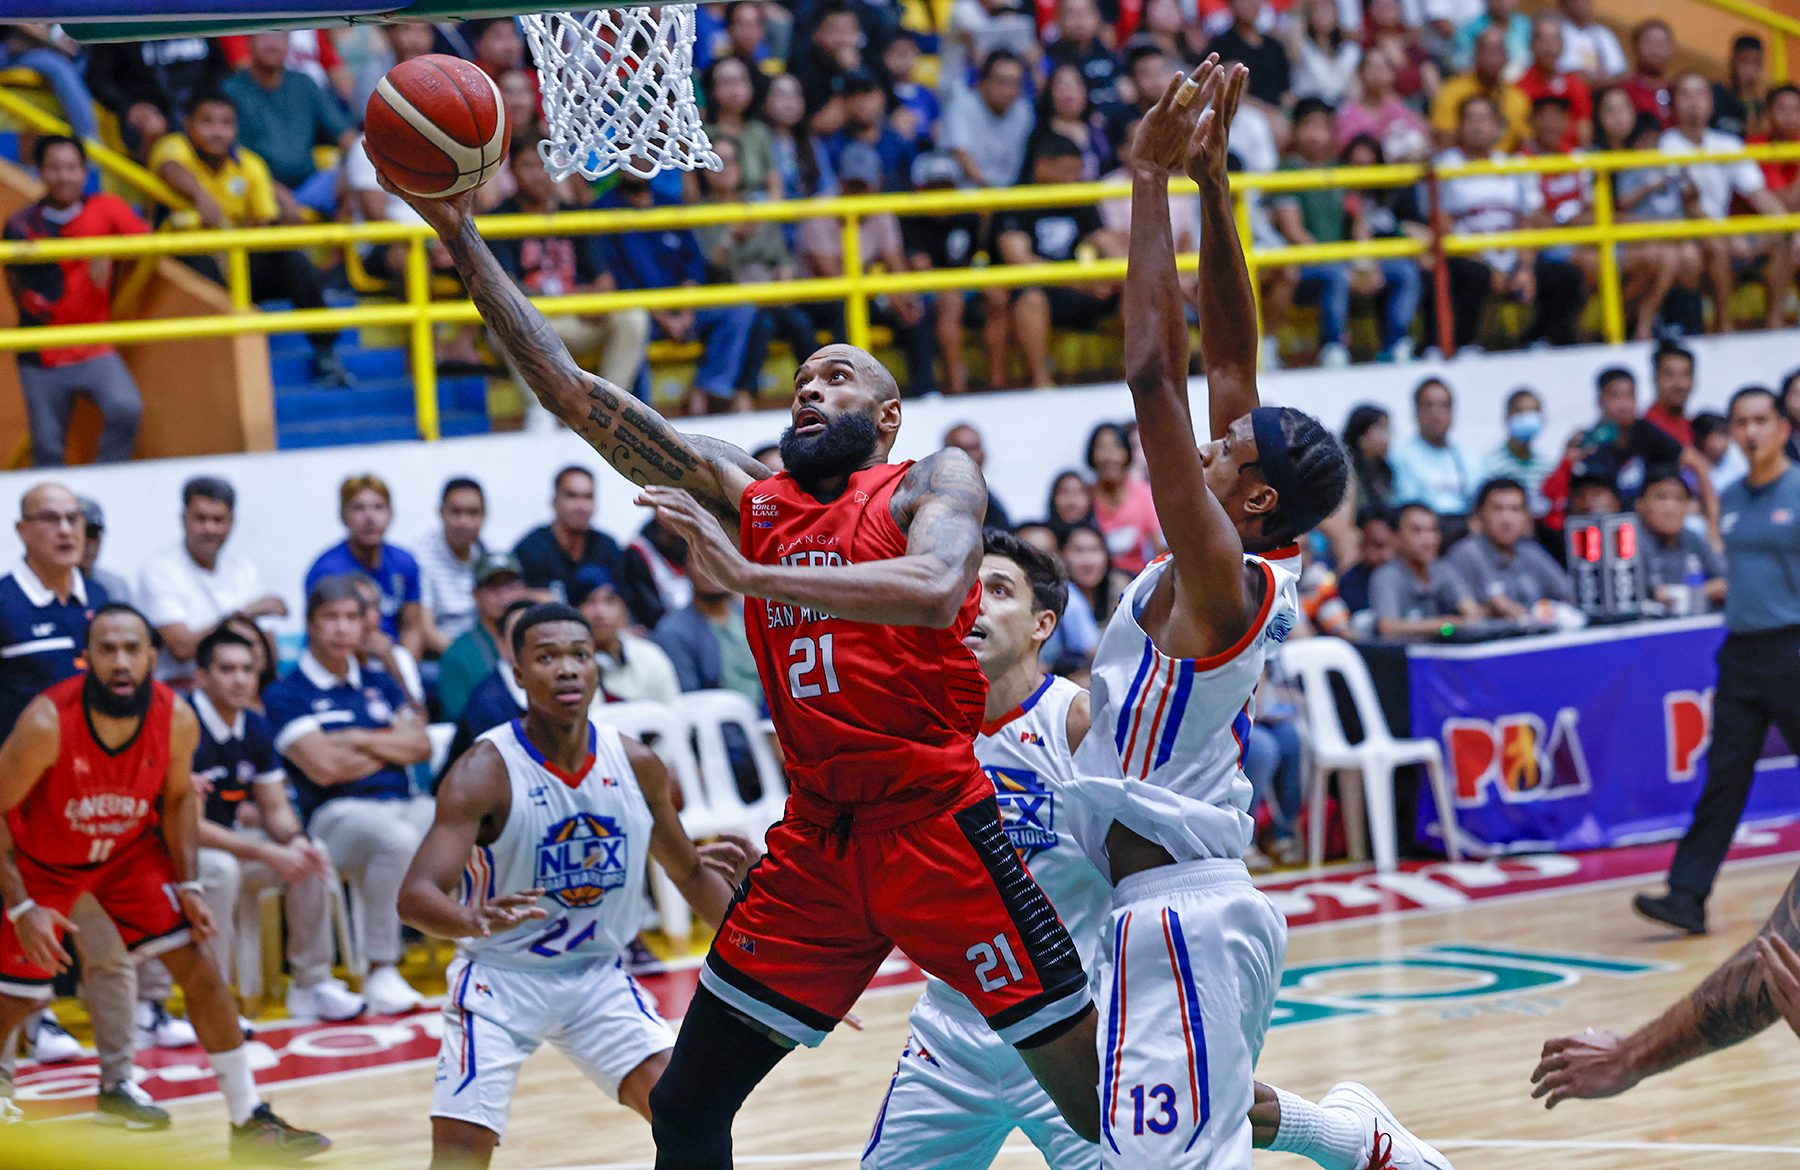 Ginebra secures twice-to-beat Comm’s Cup slot, escapes NLEX in Albay thriller